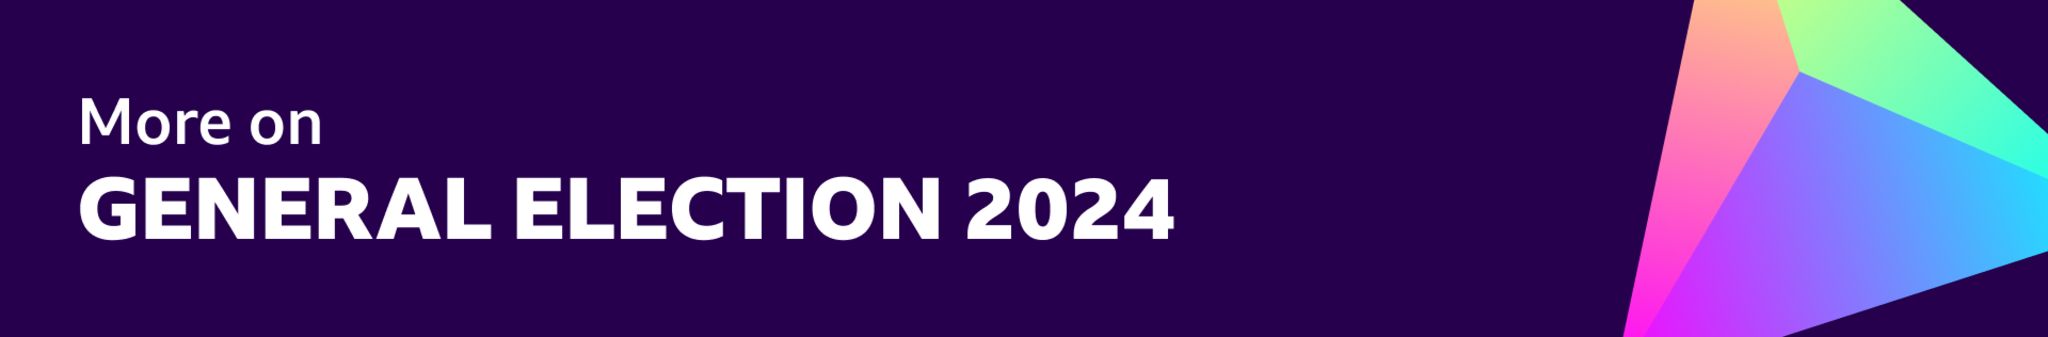 Graphic image saying "More on GENERAL ELECTION 2024"